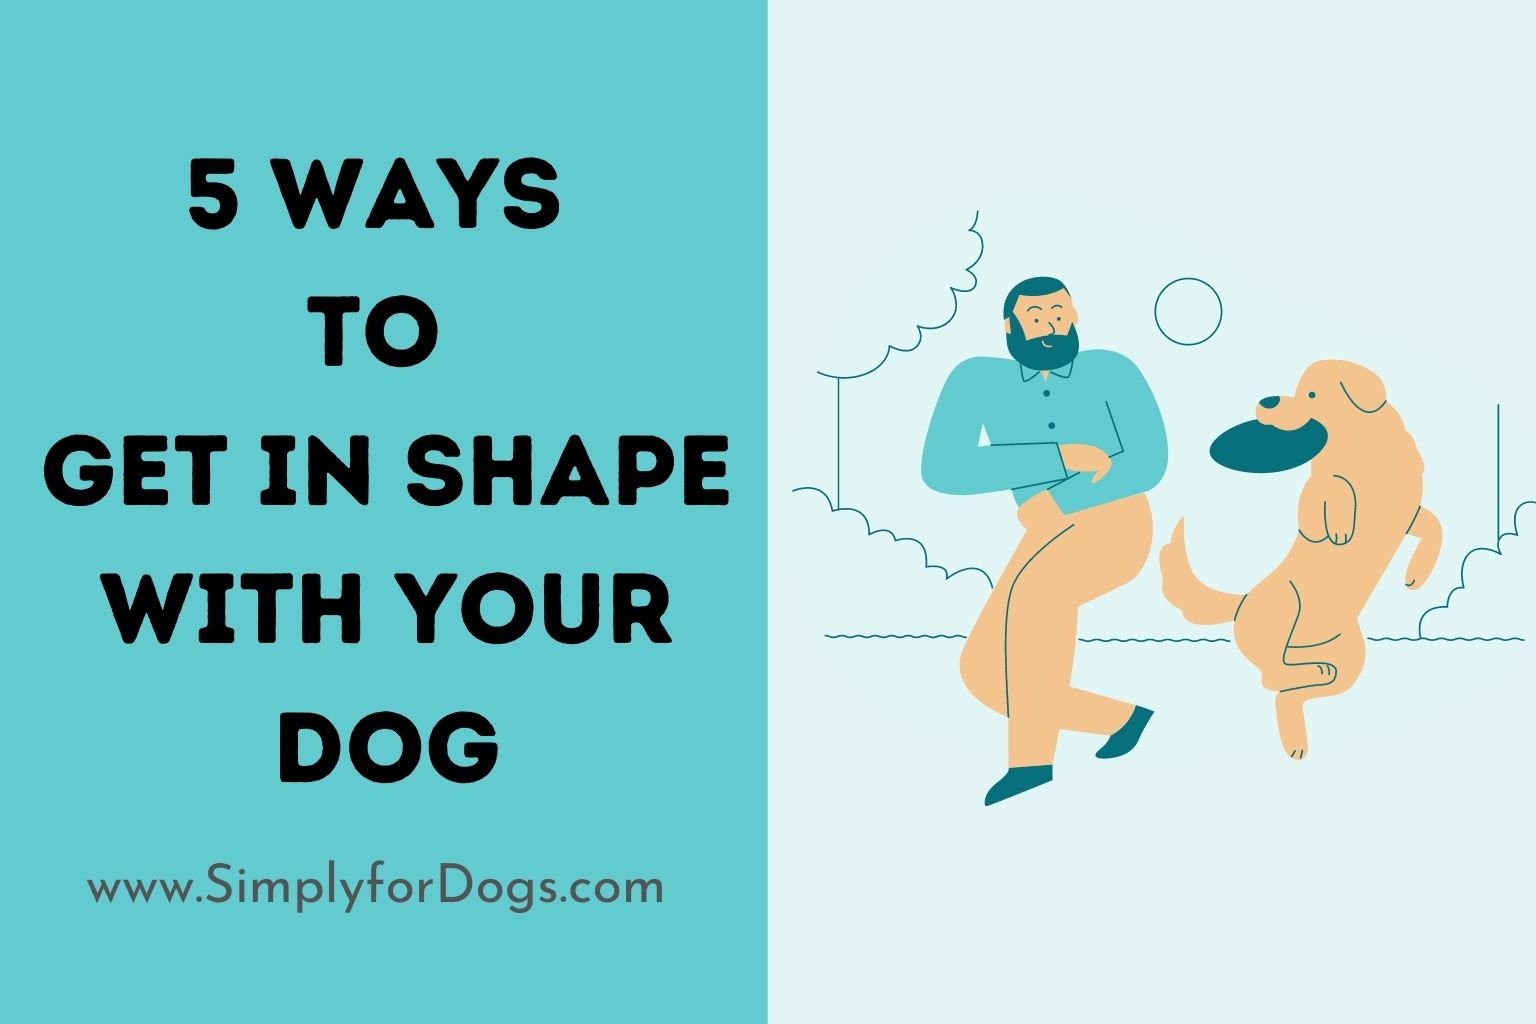 5 Ways to Get in Shape with Your Dog